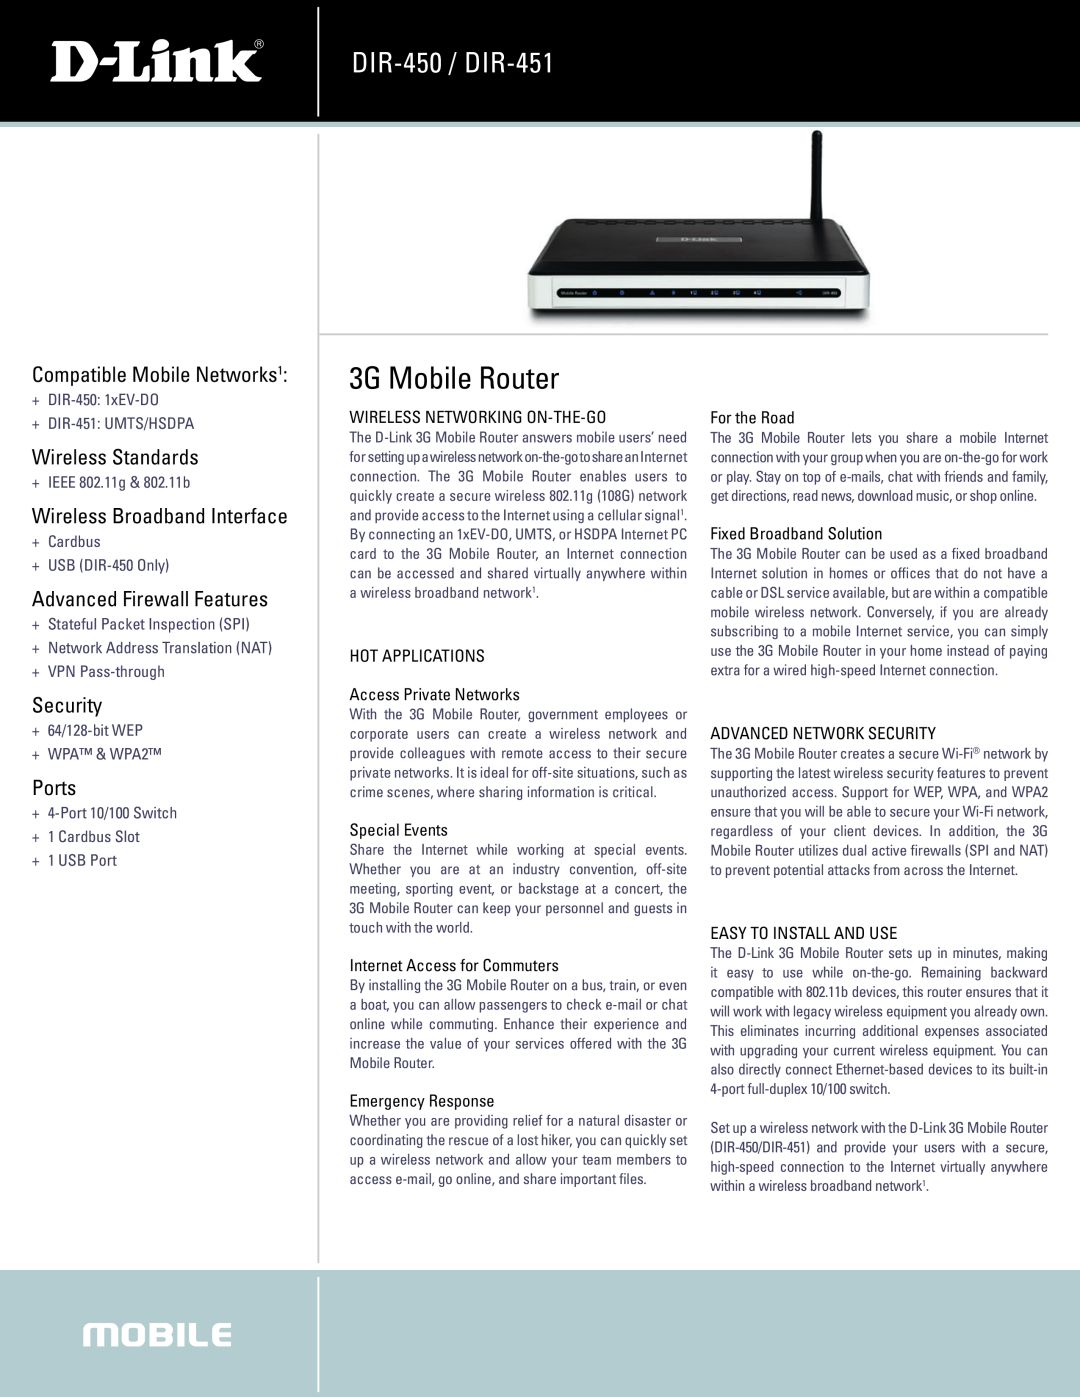 D-Link manual 3G Mobile Router, DIR-450 / DIR-451, Compatible Mobile Networks1, Wireless Standards, Security, Ports 